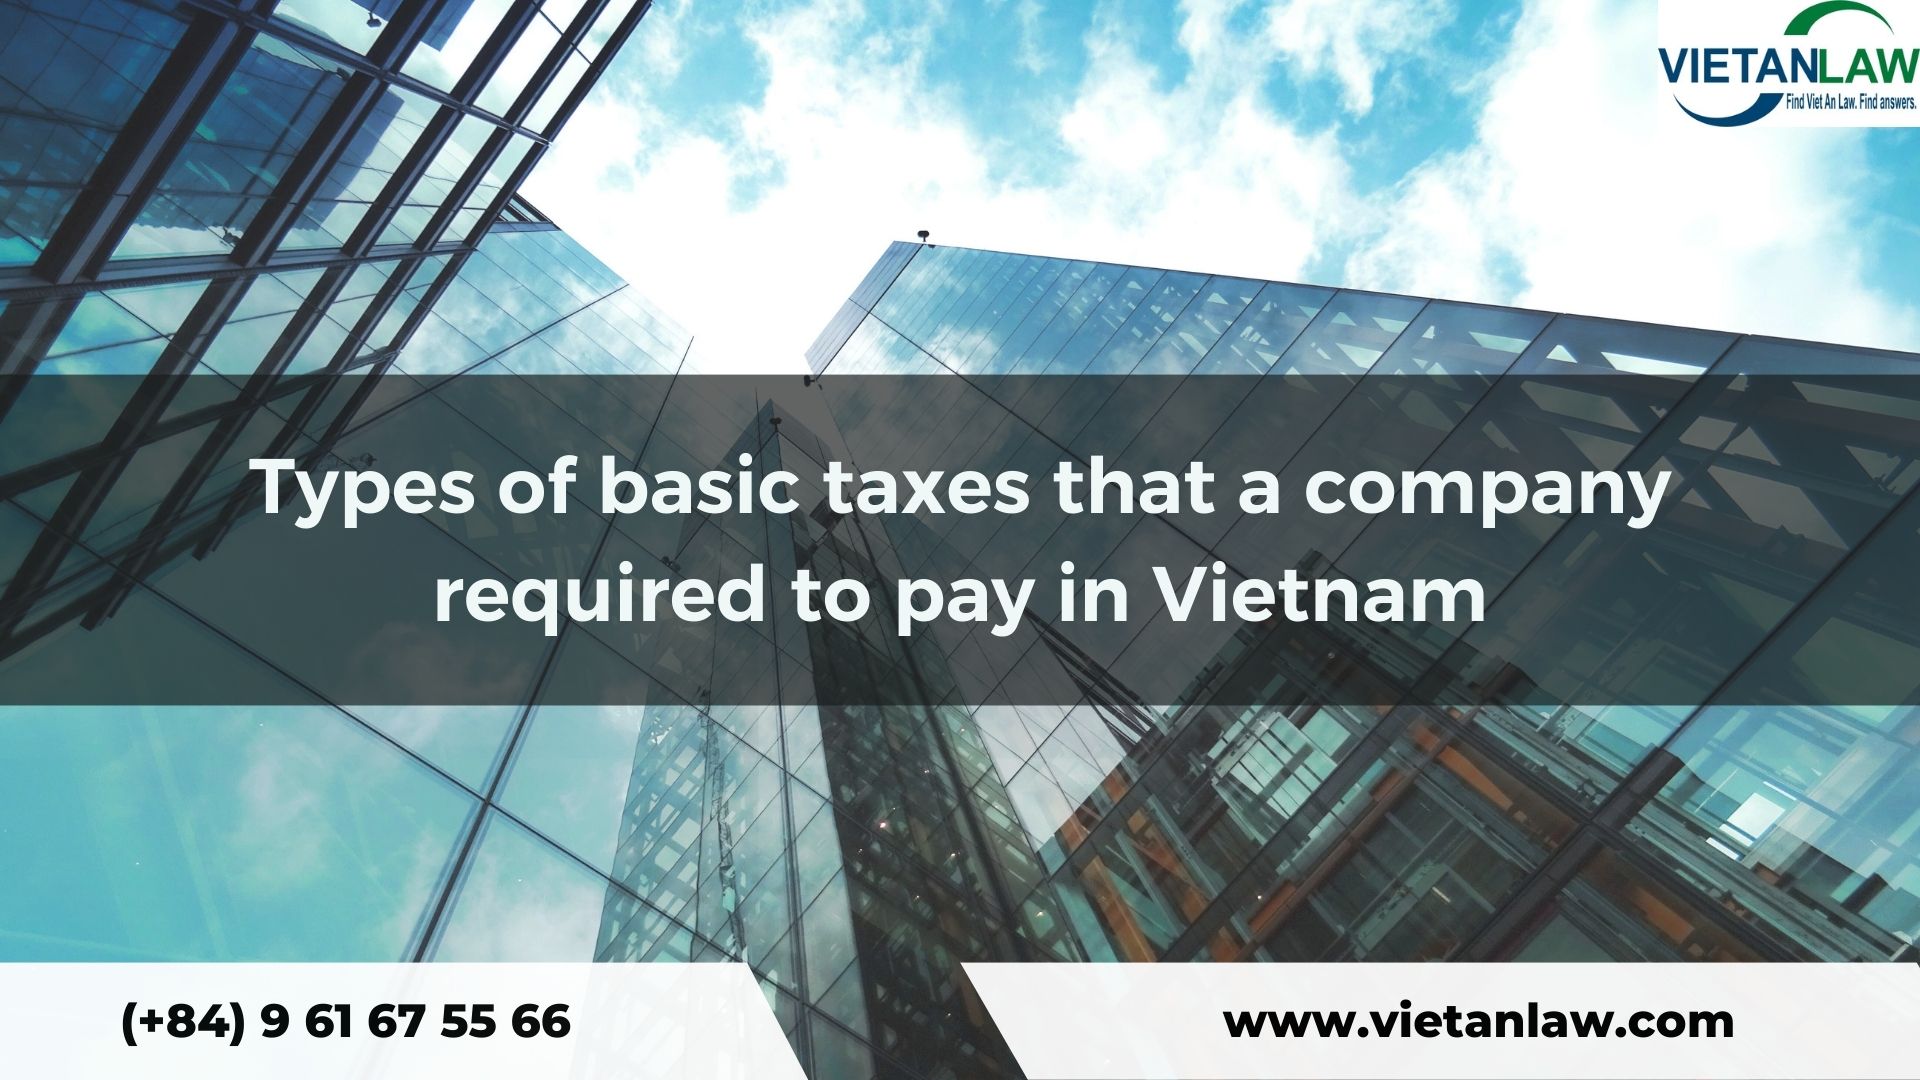 Types of basic taxes that a company required to pay in Vietnam